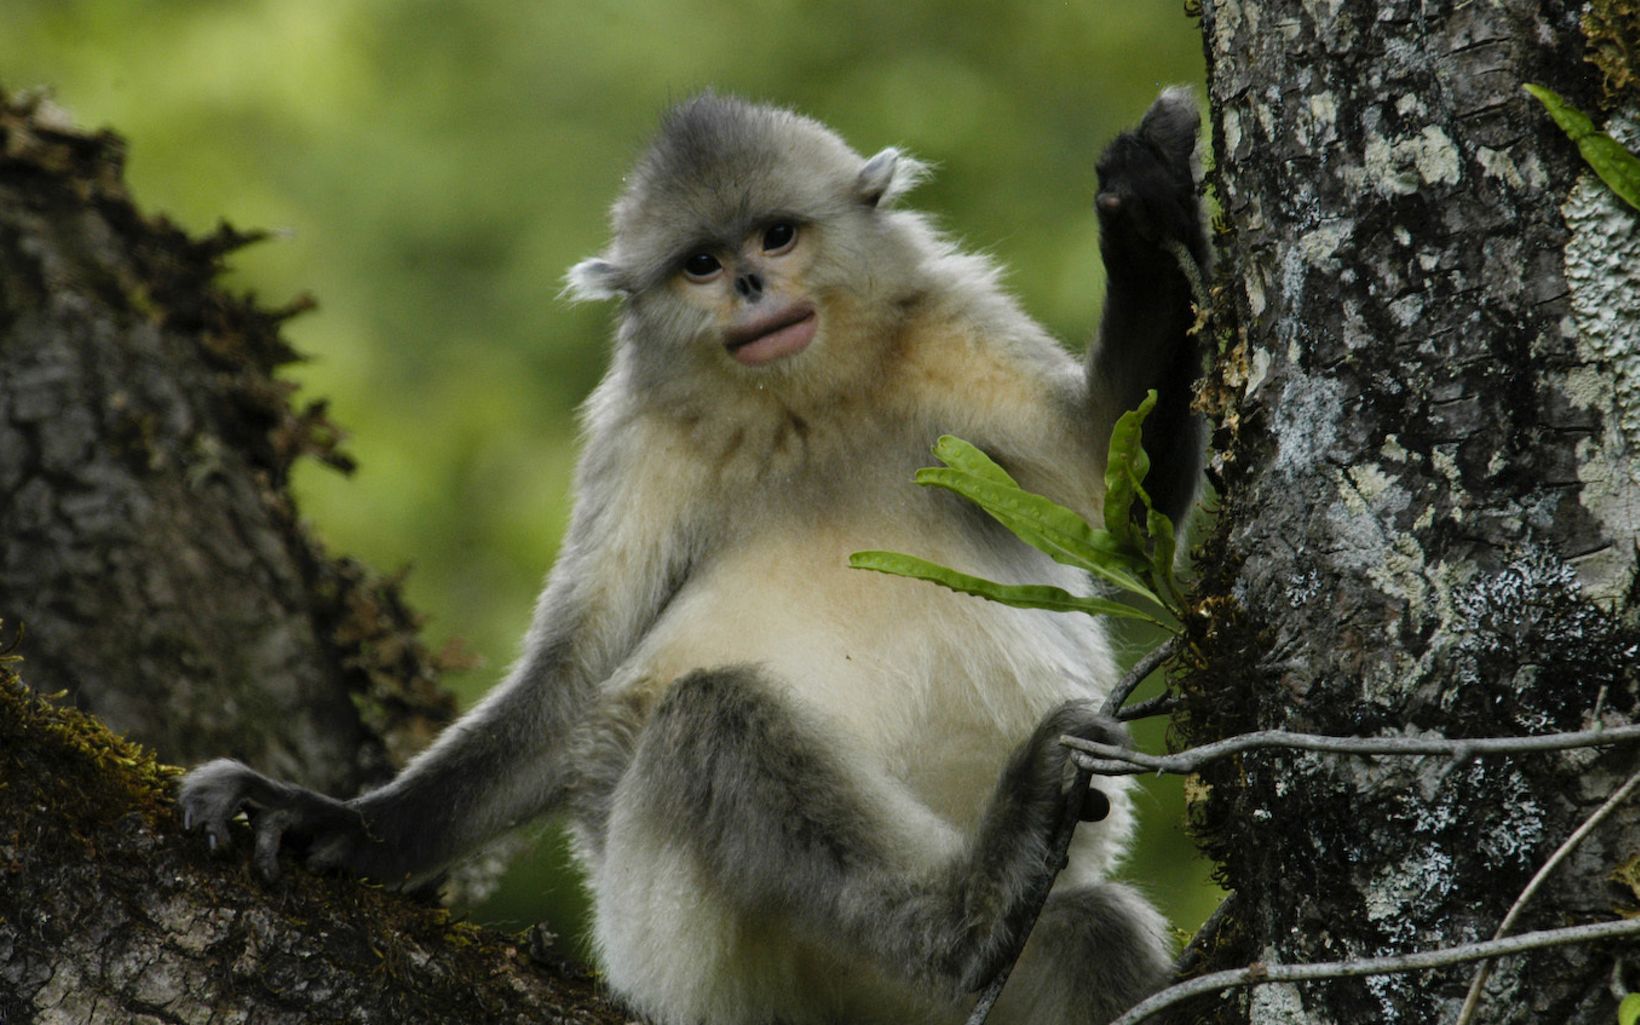 There are fewer than 2,000 Yunnan golden (snub nosed) monkeys (Rhinopithecus bieti) left in Yunnan's old growth alpine forests. They are considered one of the most endangered primates on Earth.